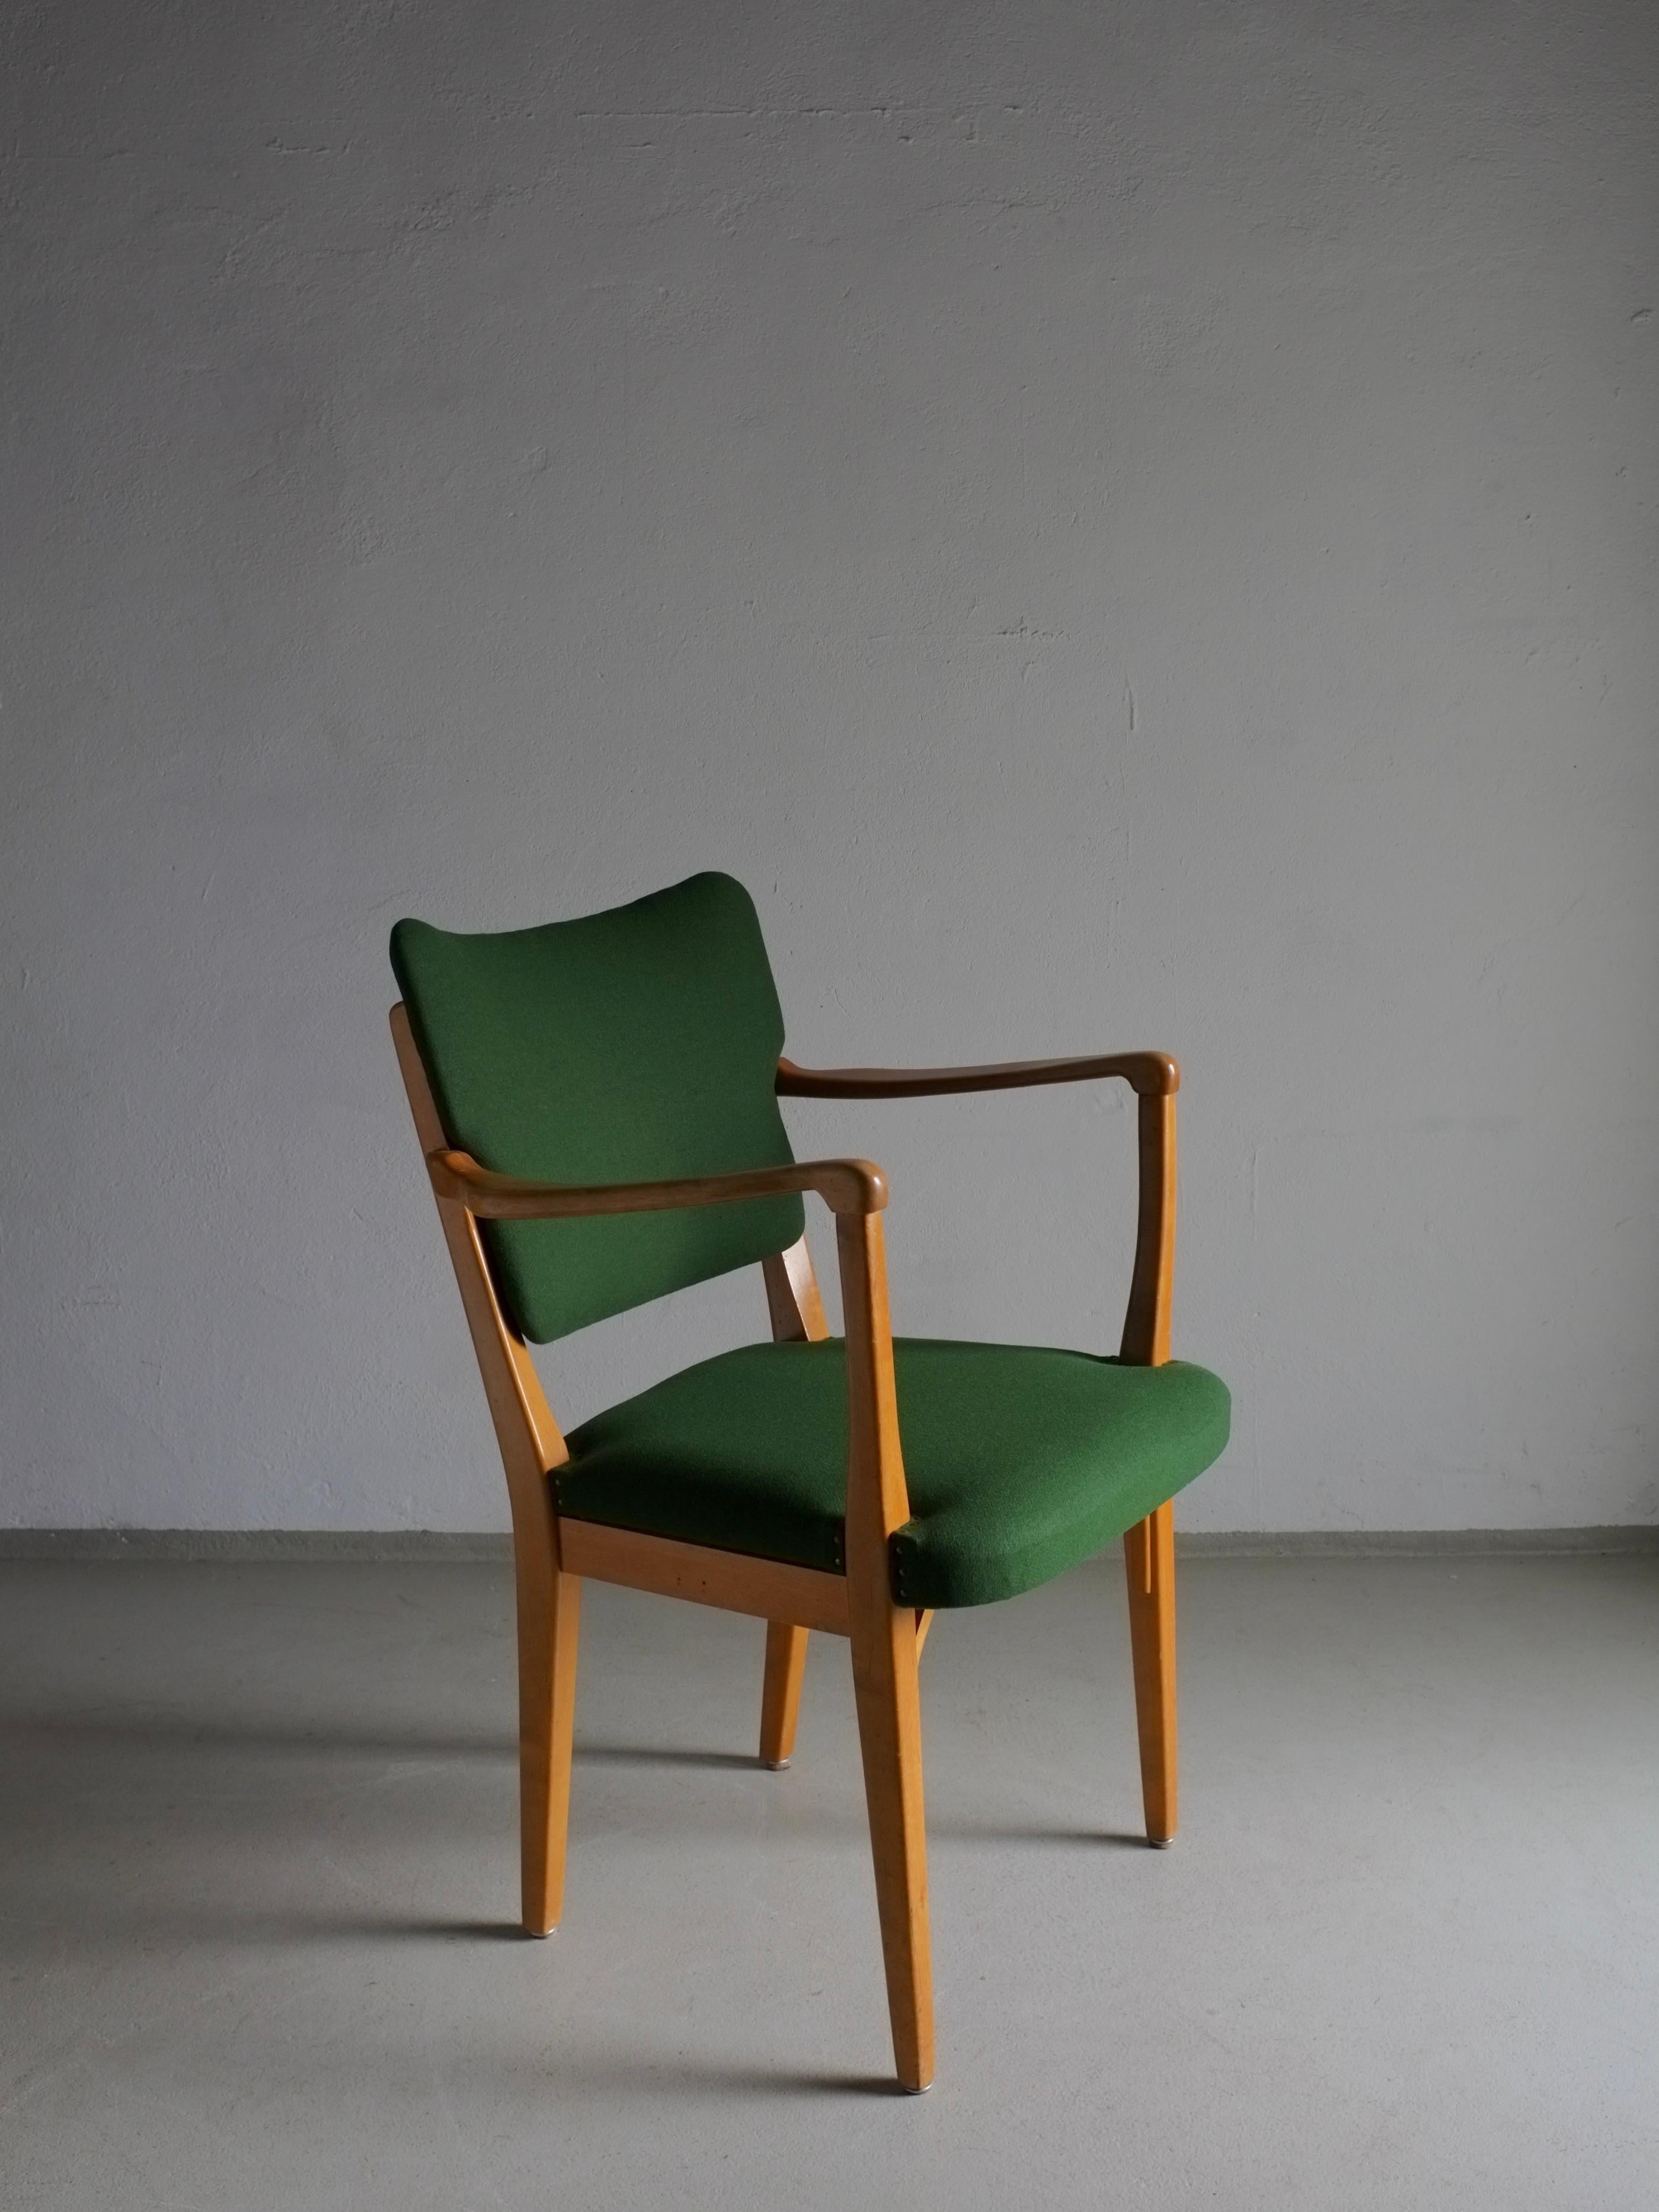 A vintage Swedish armchair from Nordiska Kompaniet (Model 562-004) made of beech wood with new upholstery.

Additional information:
Country of manufacture: Sweden
Period: 1940s
Dimensions: W 58 cm x D 50 cm x H(total/seat/armrest) 83/43/71